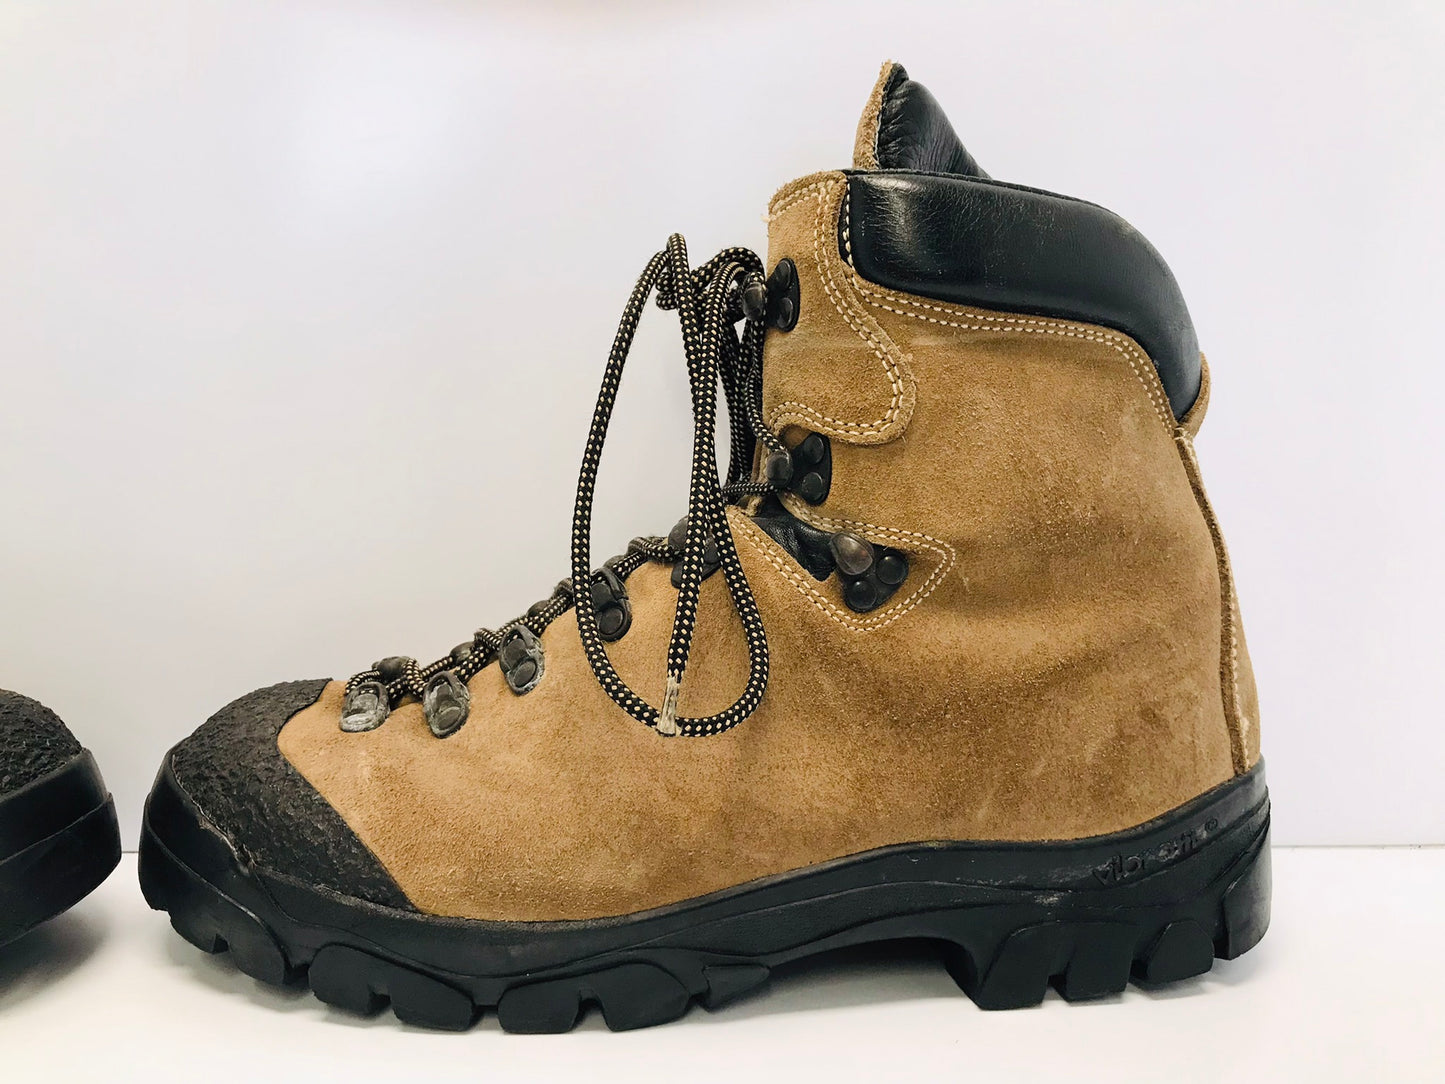 Hiking Boots Men's Size 9.5 Vibram Leather Suade Boots Outstanding Quality